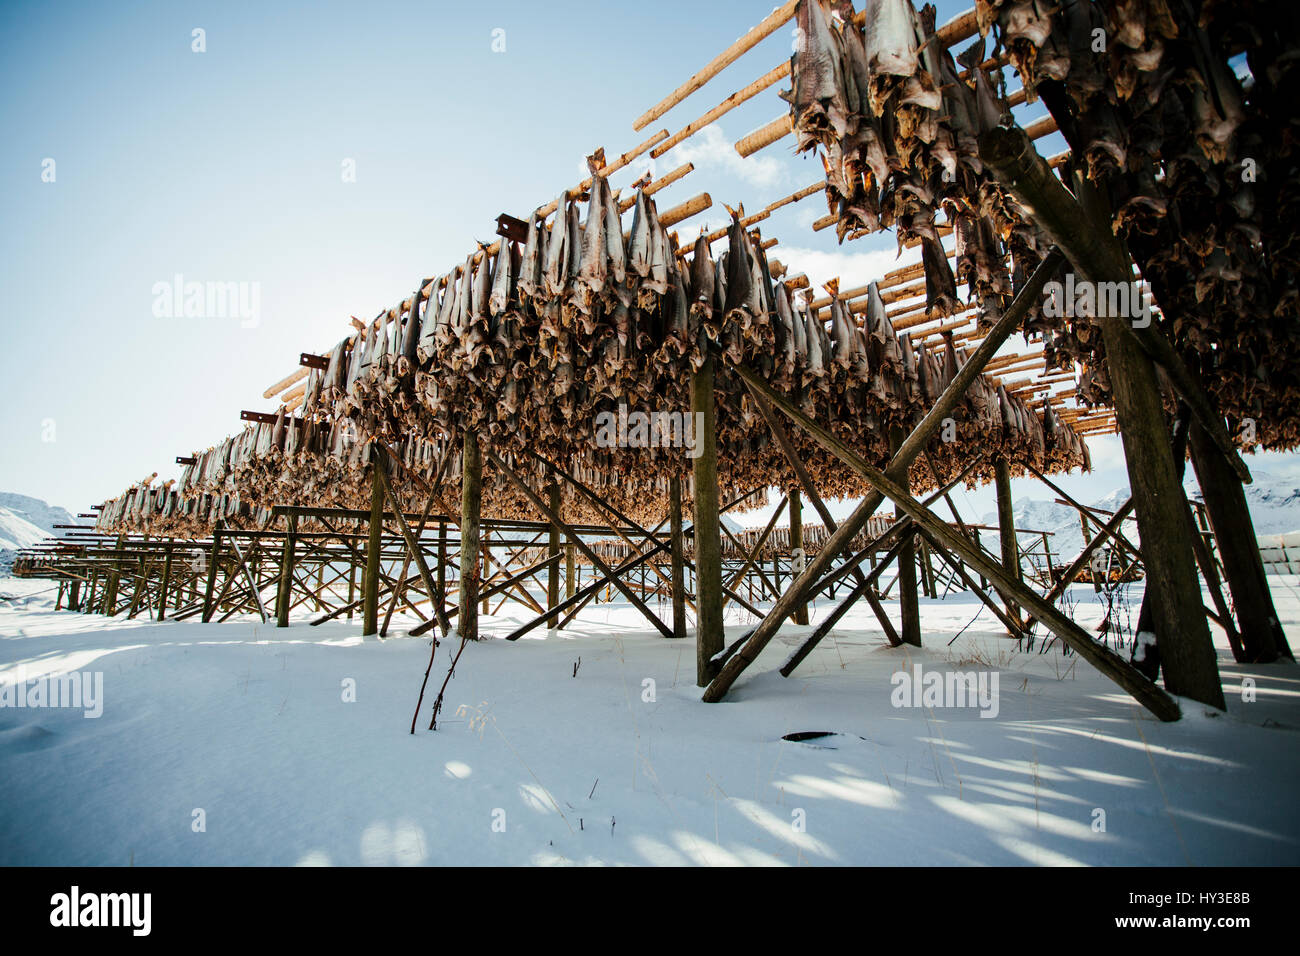 Norway, Lofoten, Large amount of dead fish hanging on wooden construction Stock Photo